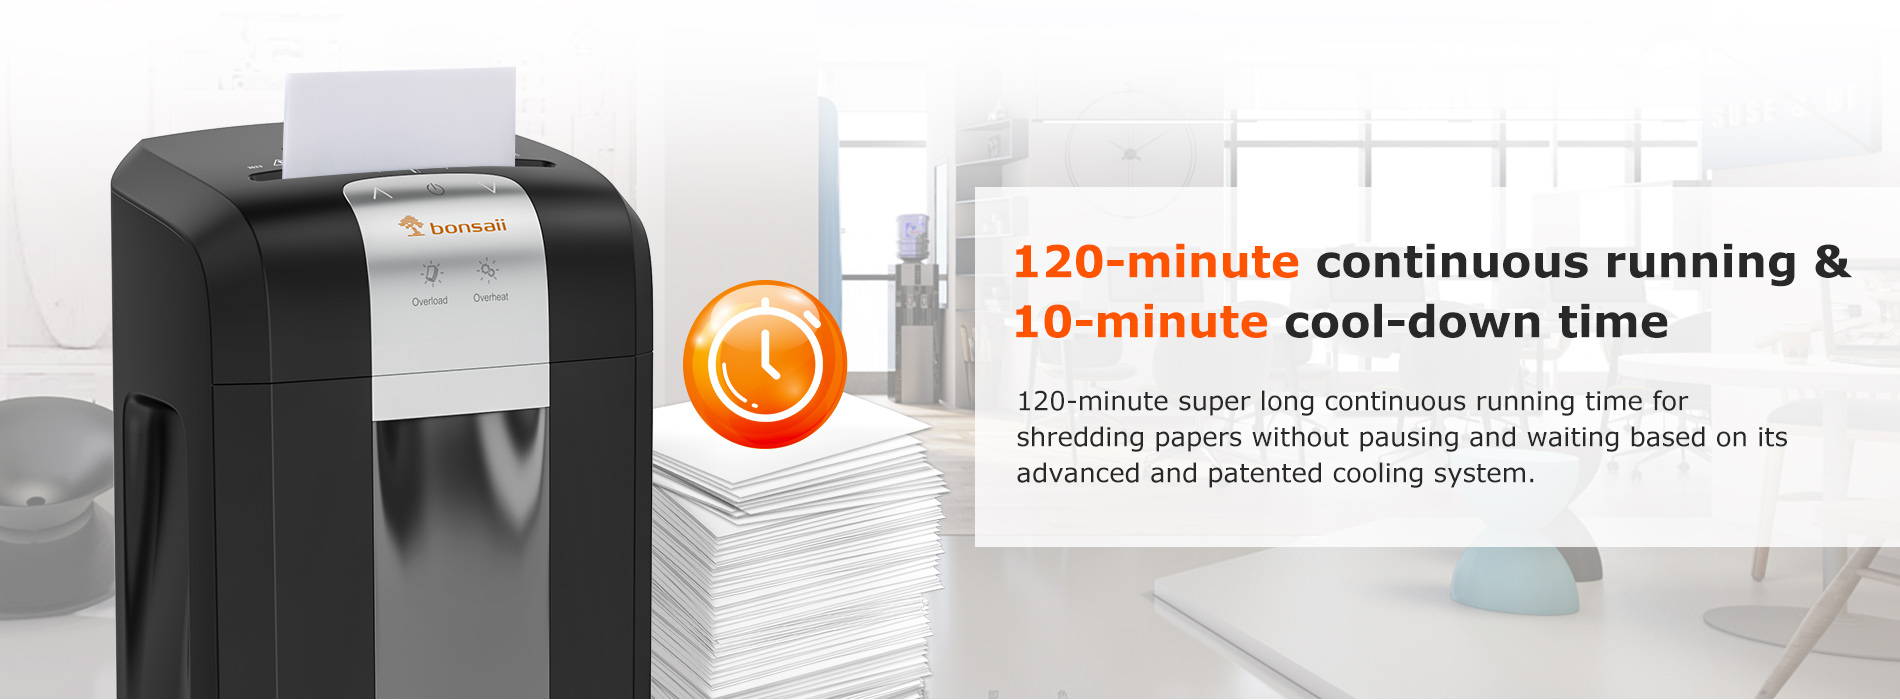 120-minute continuous running & 10-minute cool-down time 120-minute super long continuous running time for shredding papers without pausing and waiting based on its advanced and patented cooling system.